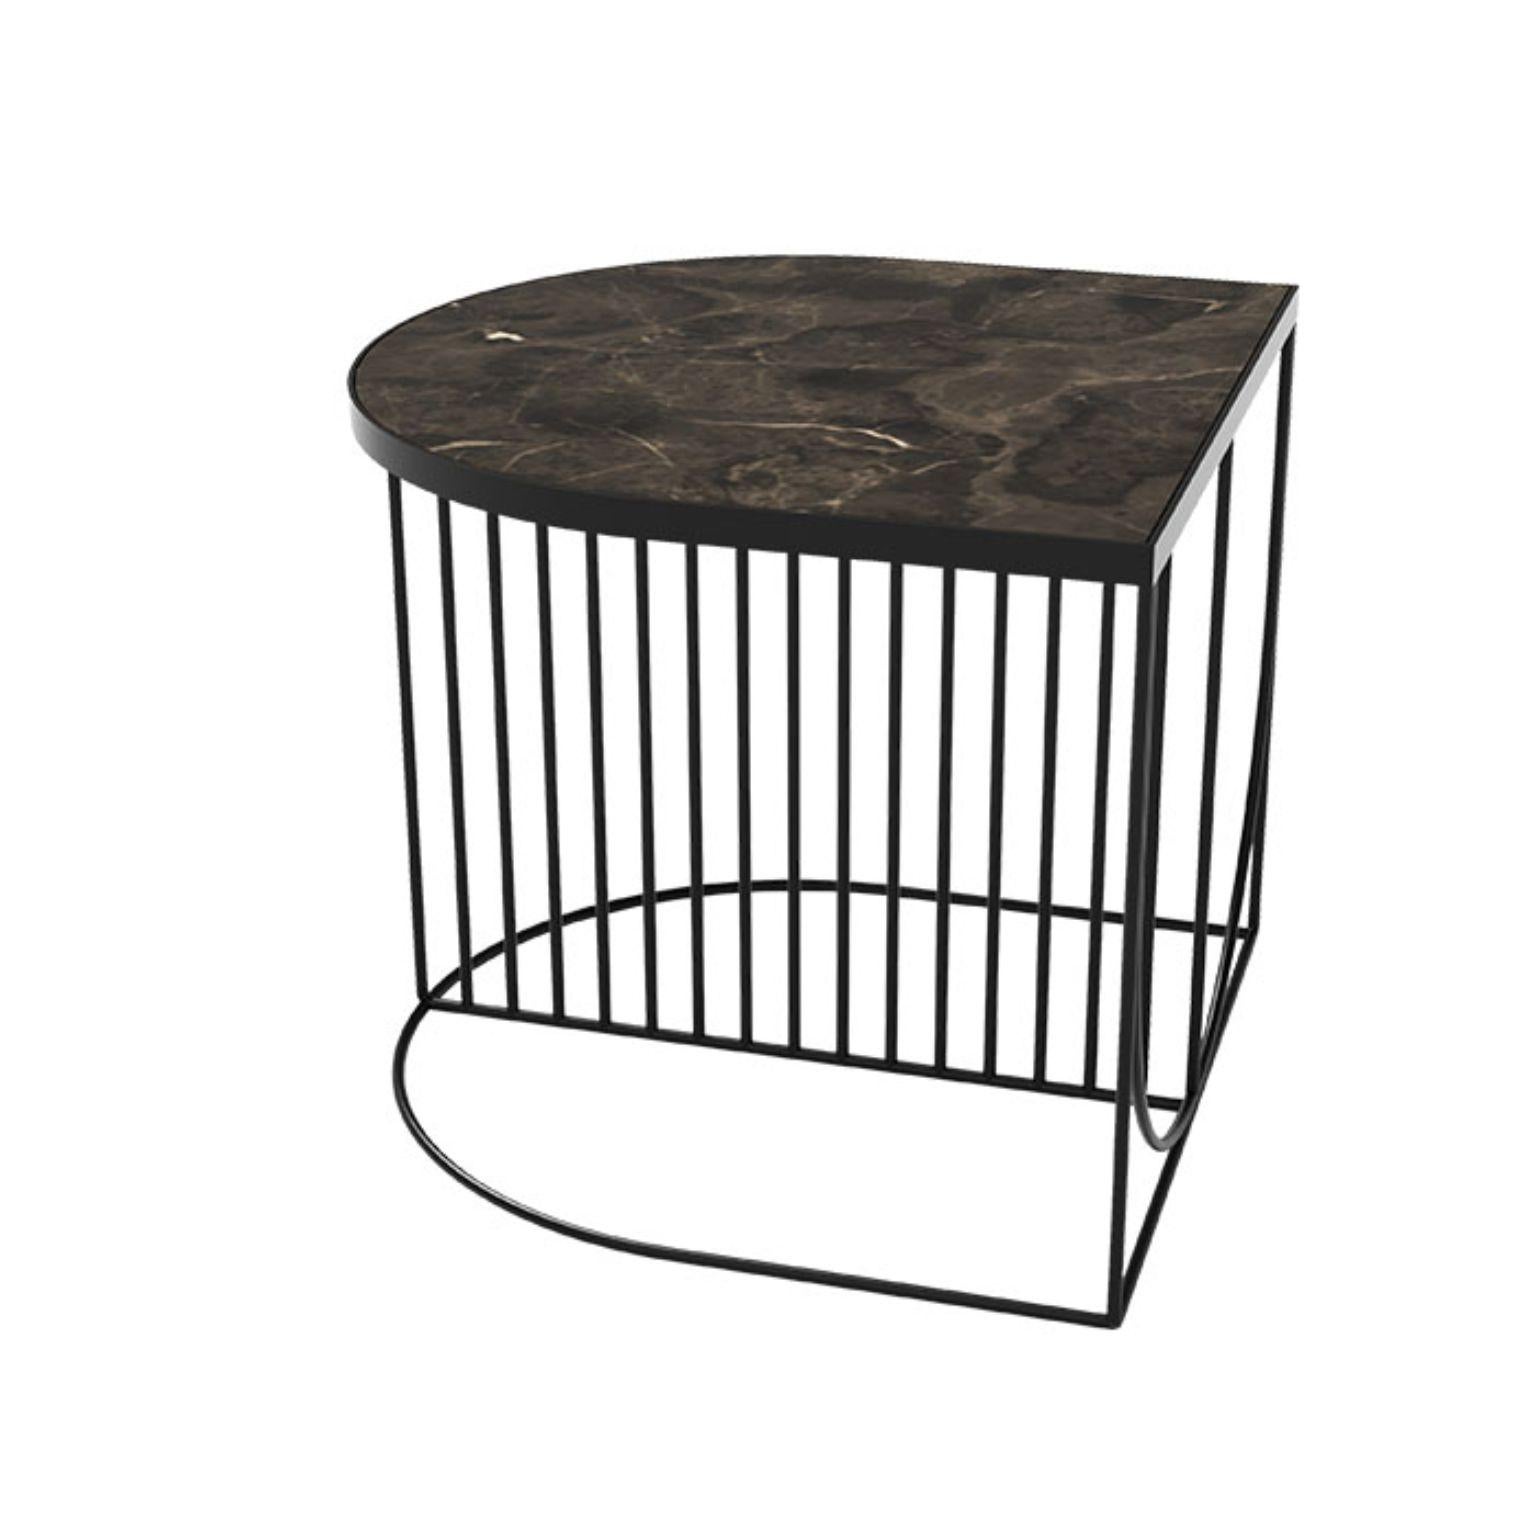 Brown marble and black steel contemporary side table
Dimensions: L 50 x W 50 x H 44.3 CM
Materials: Marble, steel

This series consists of three different designs that you can combine in many different ways. The table tops come in two different